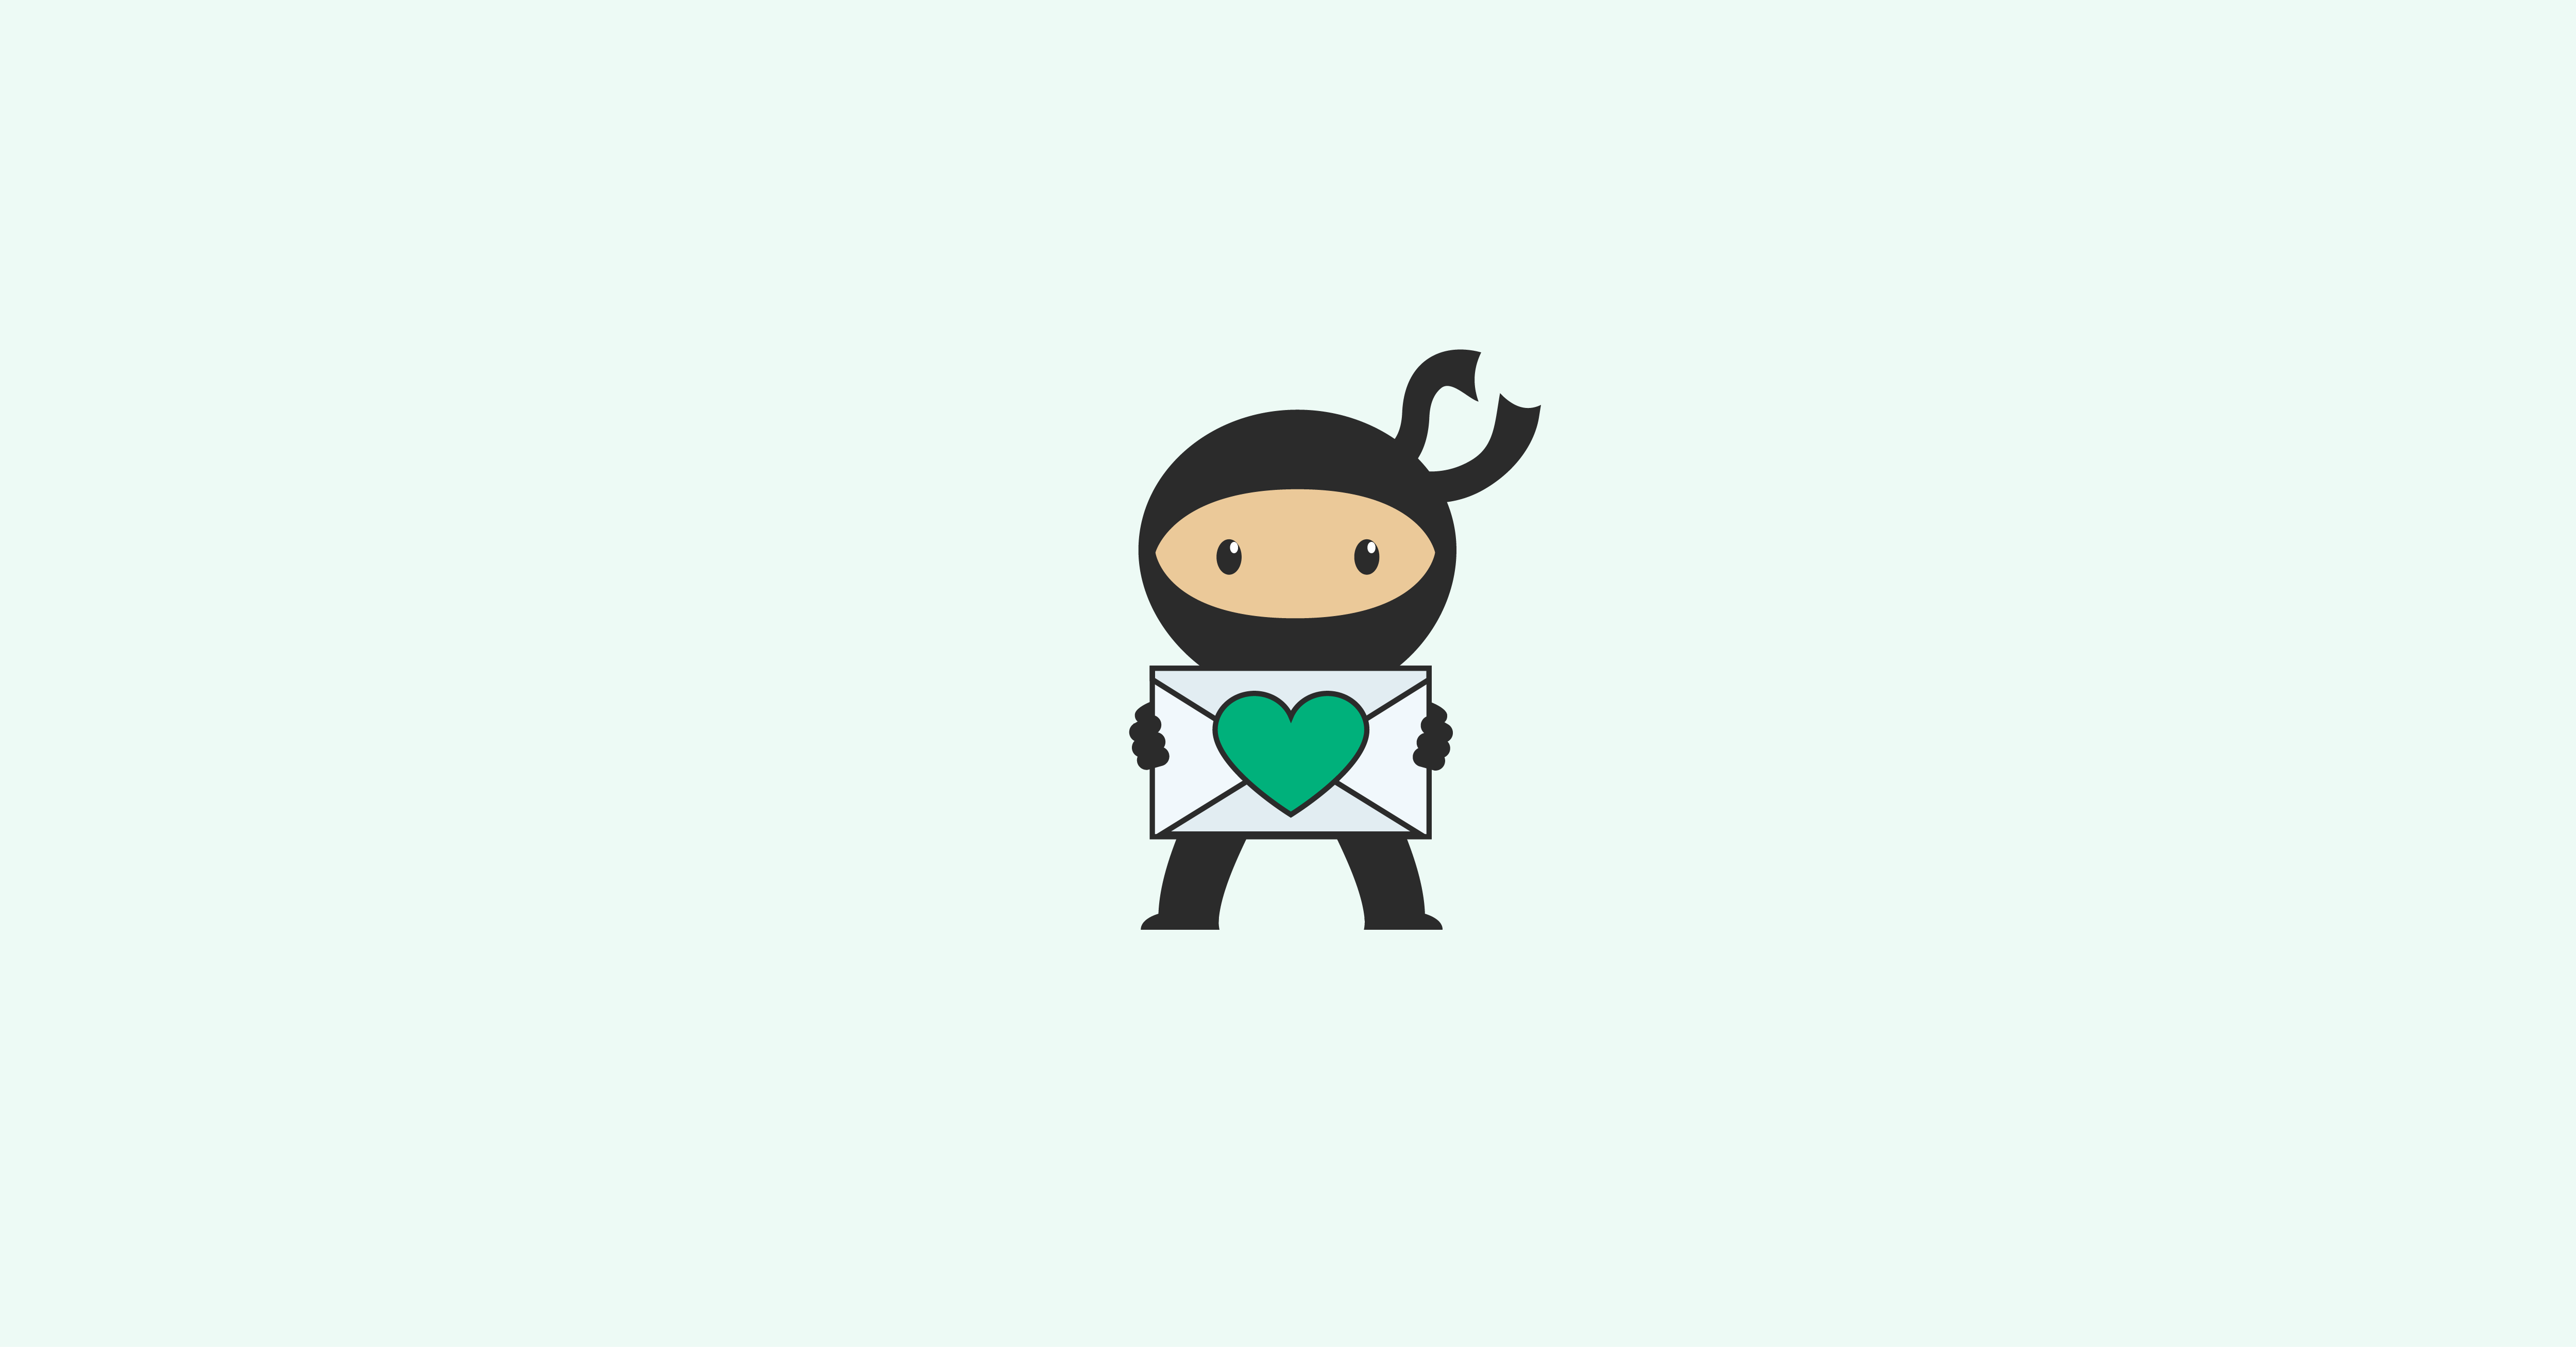 Illustration of our ninja logo extending a letter with a green heart to you